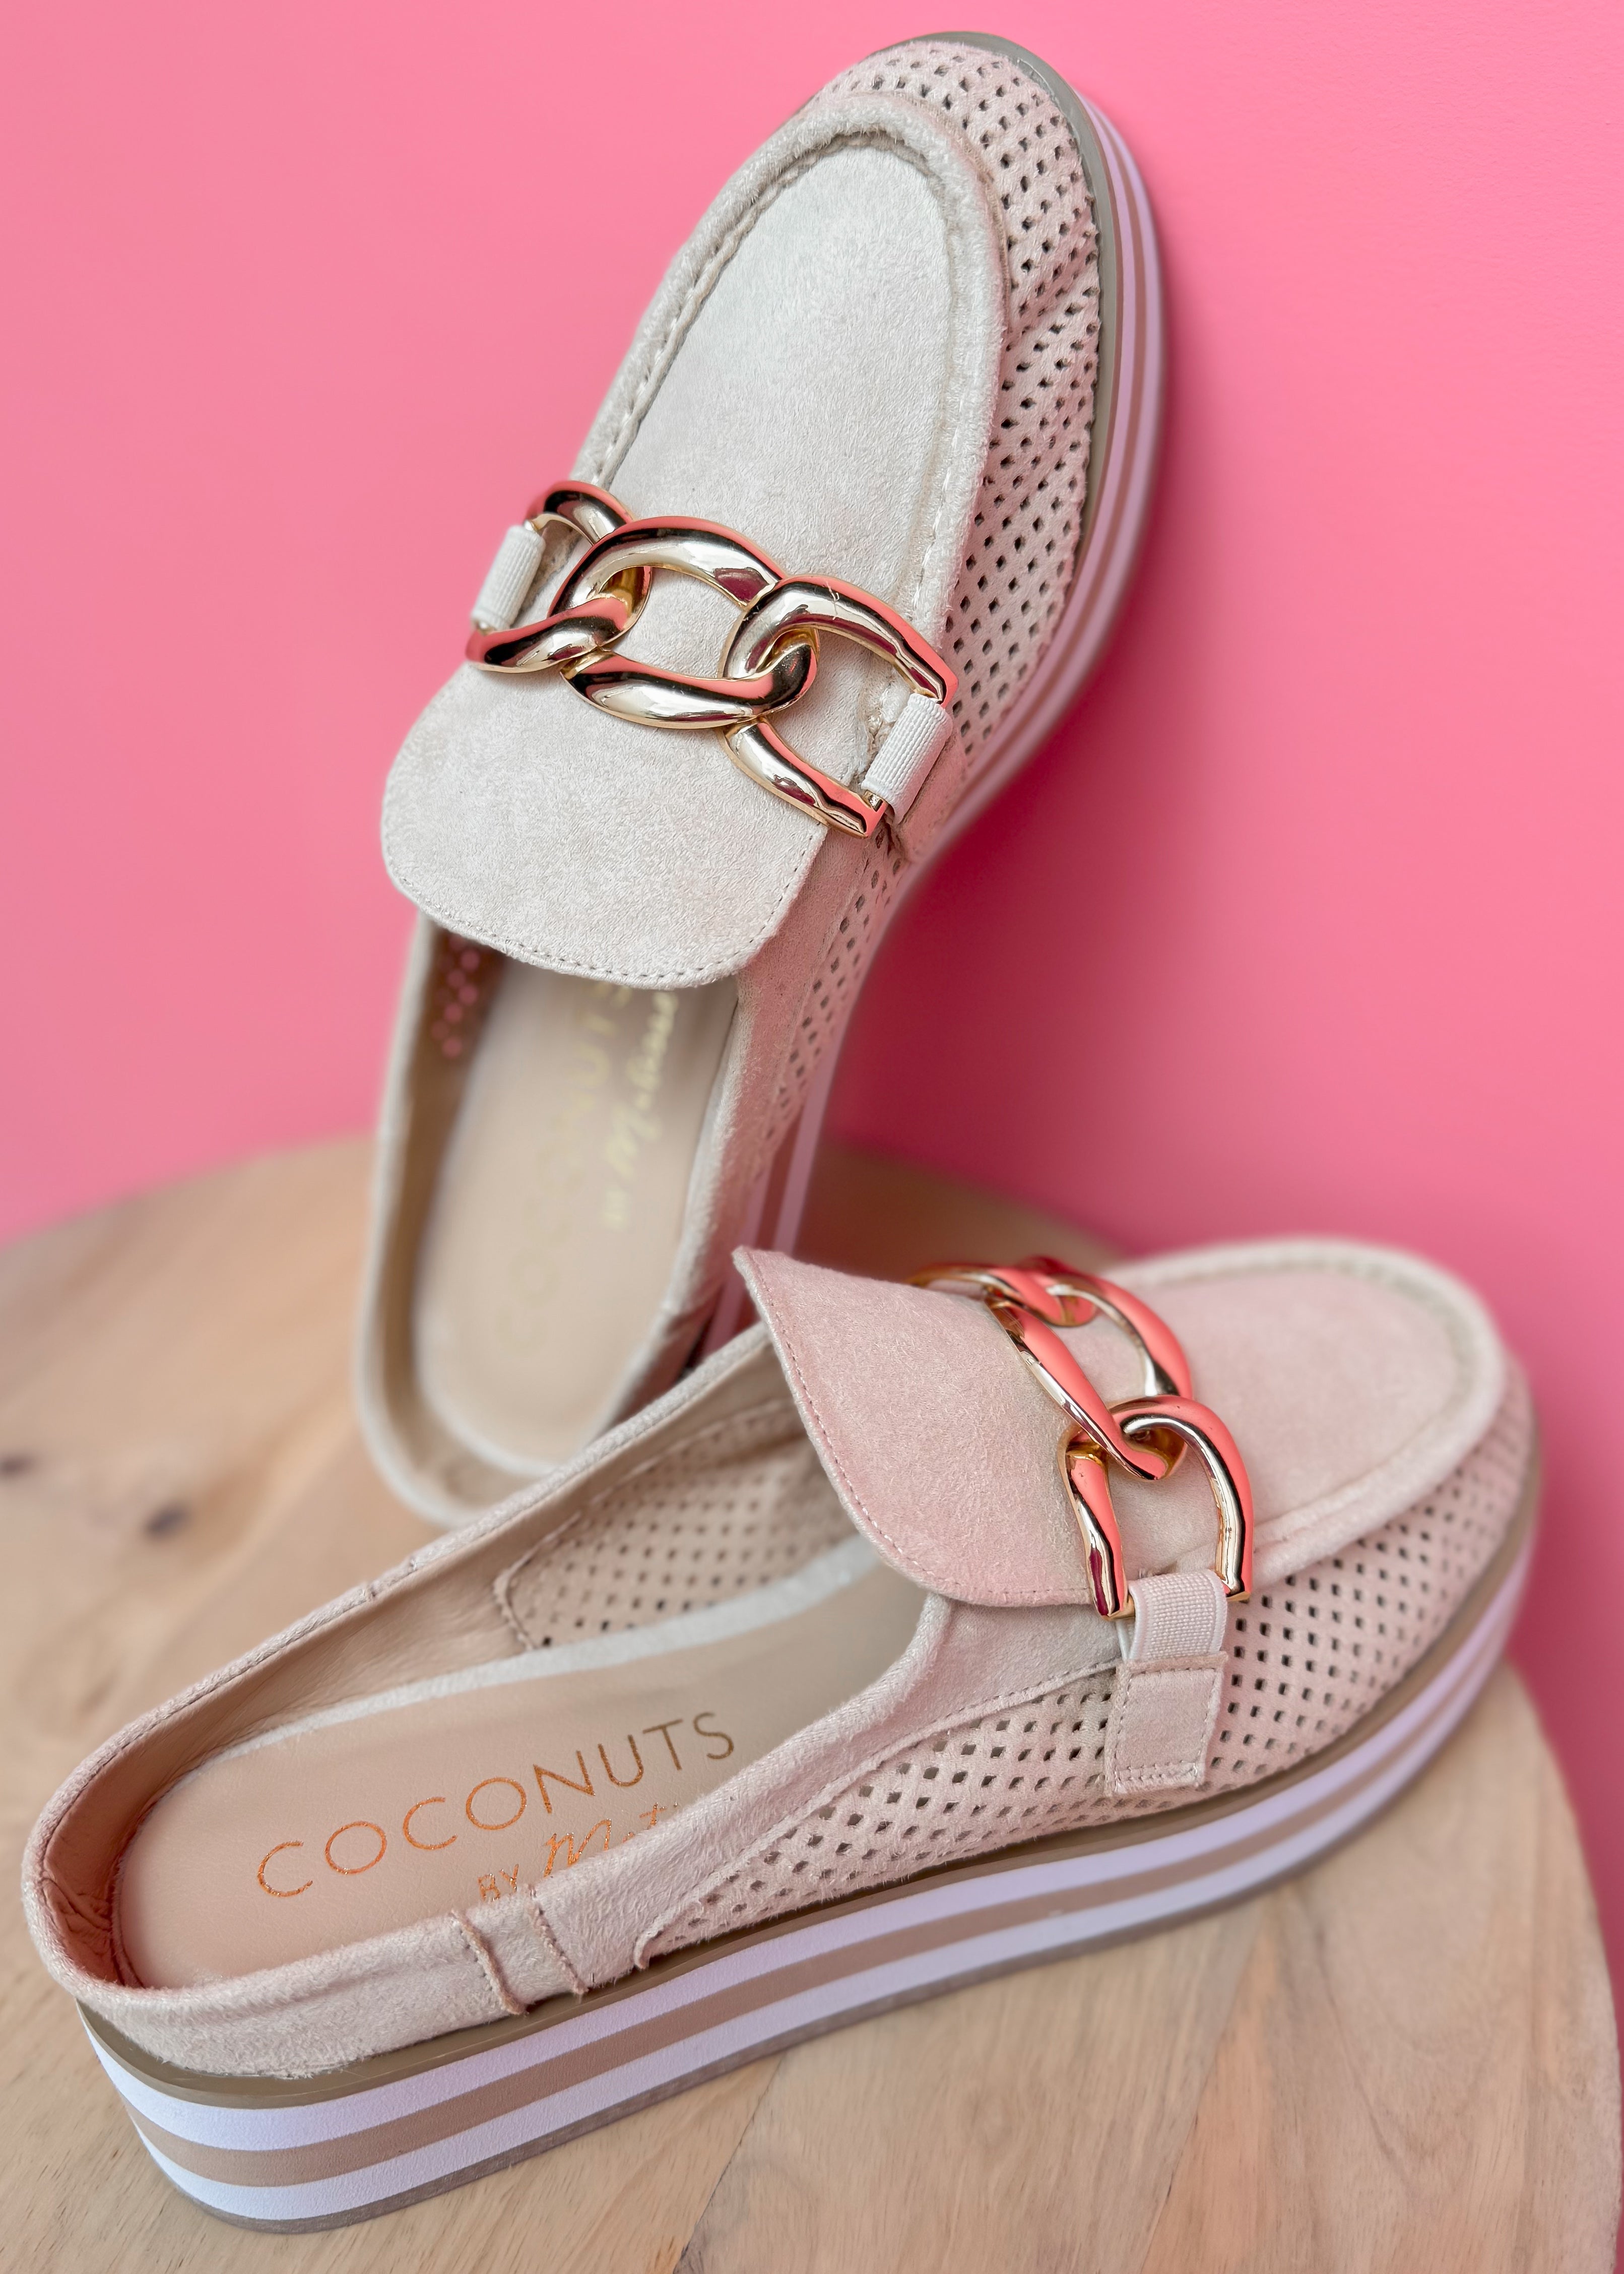 Coconuts X Matisse: Minnie Slip On Loafers